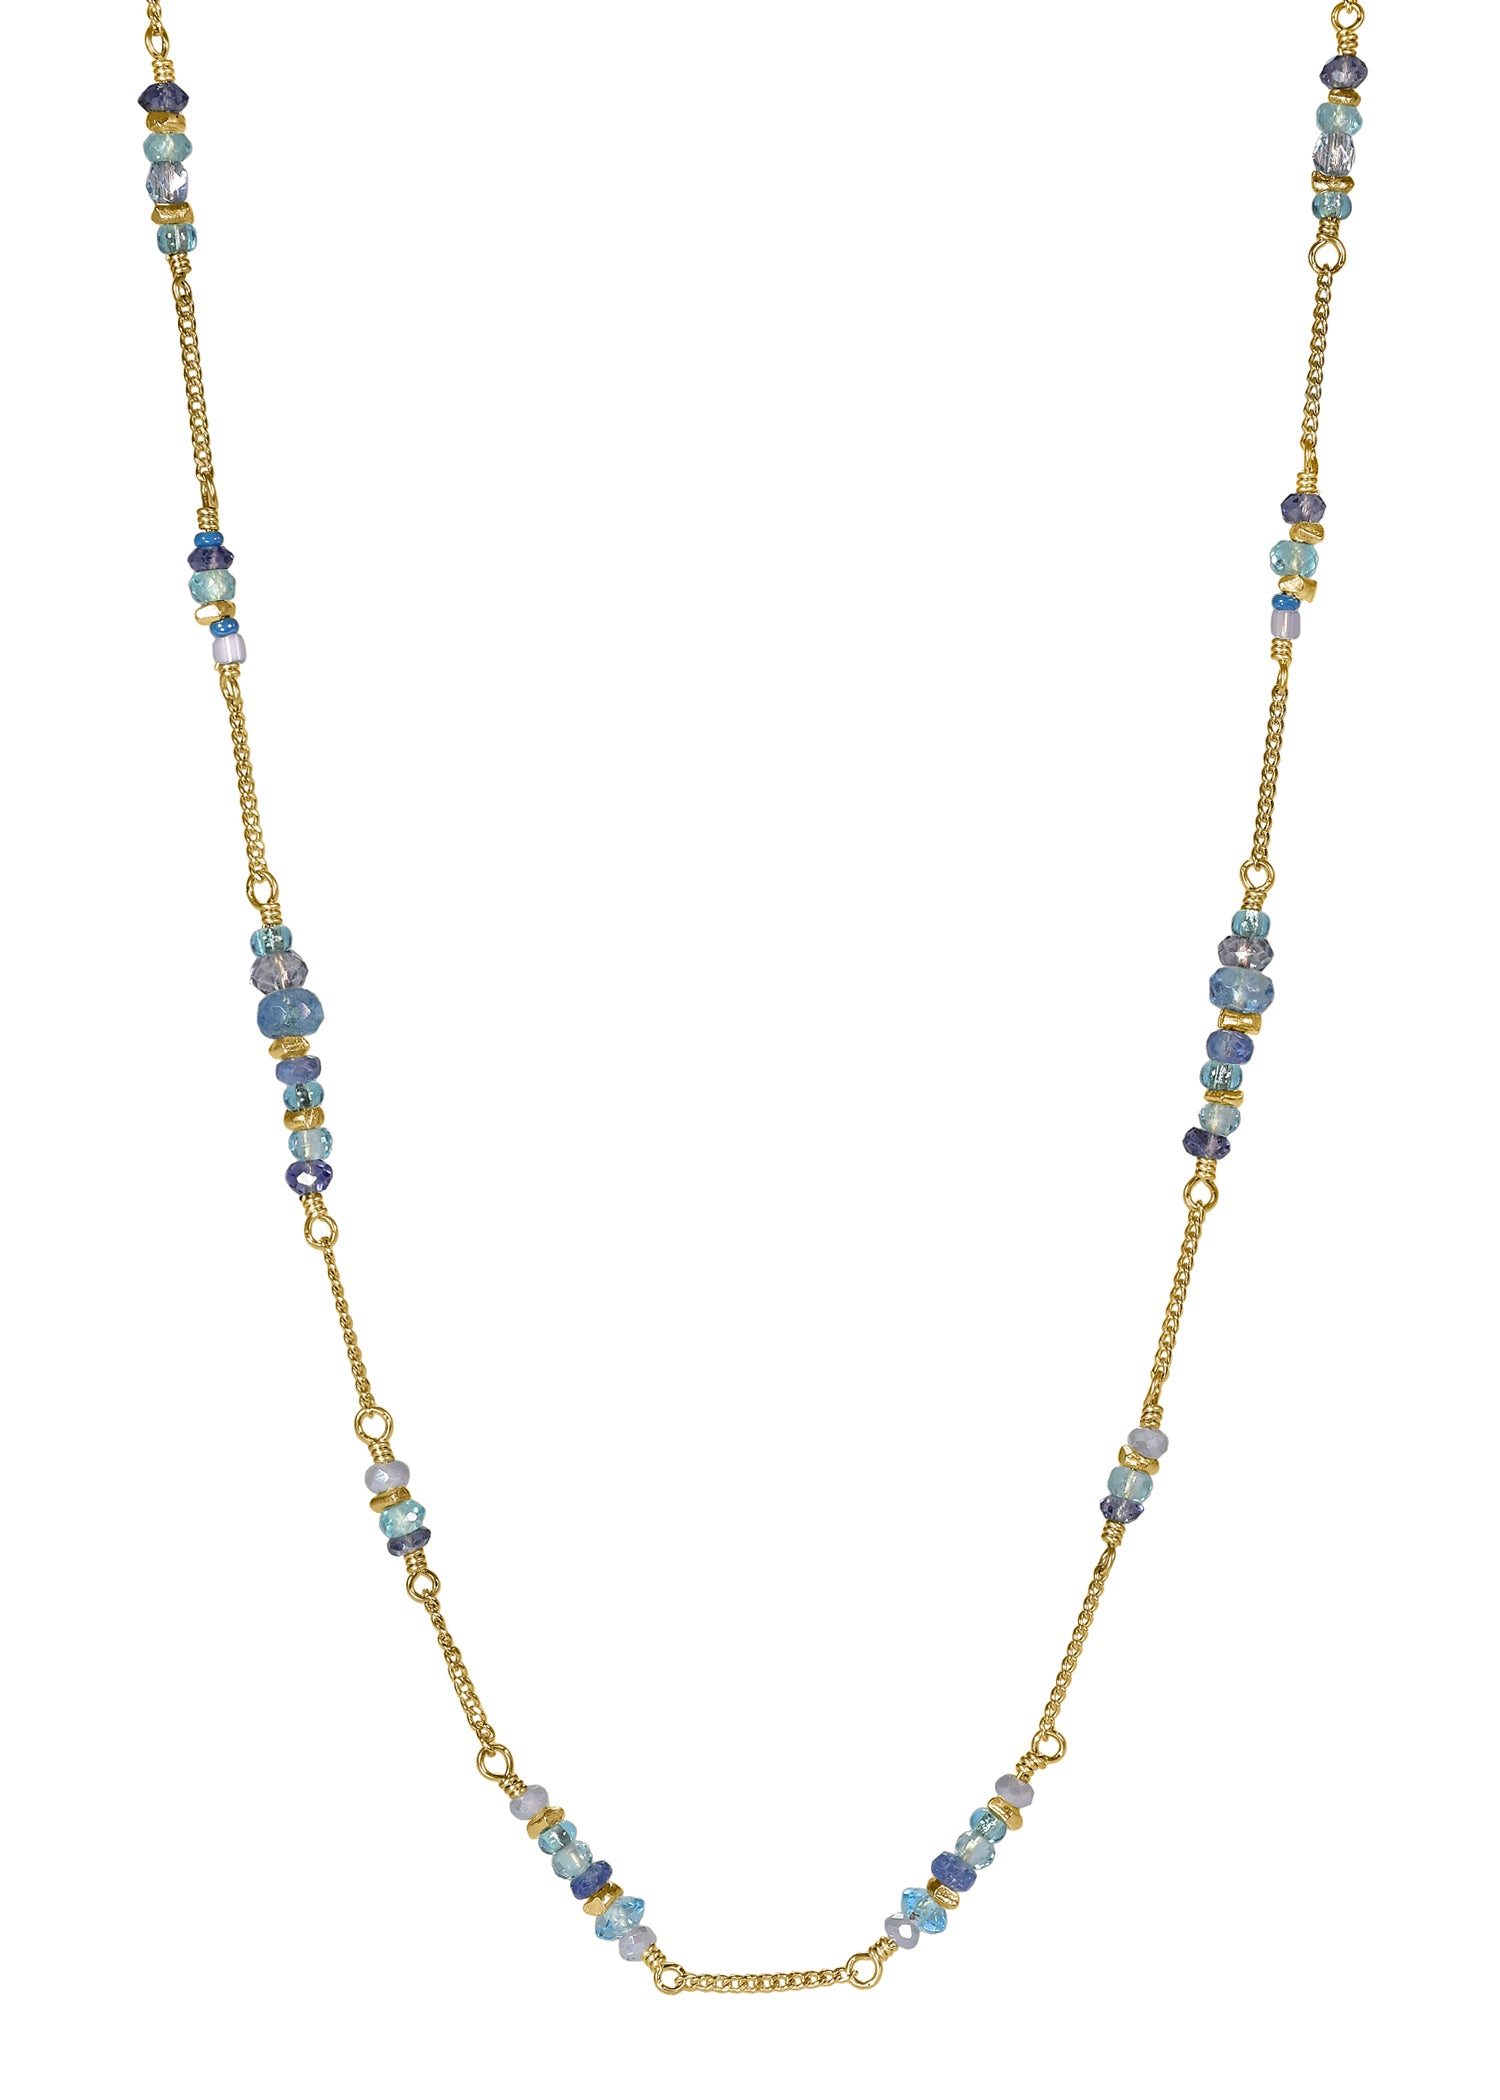 Aquamarine Blue sapphire Lolite Apatite Blue quartz Seed beads Crystal 14k gold fill Necklace measures 18" in length Handmade in our Los Angeles studio